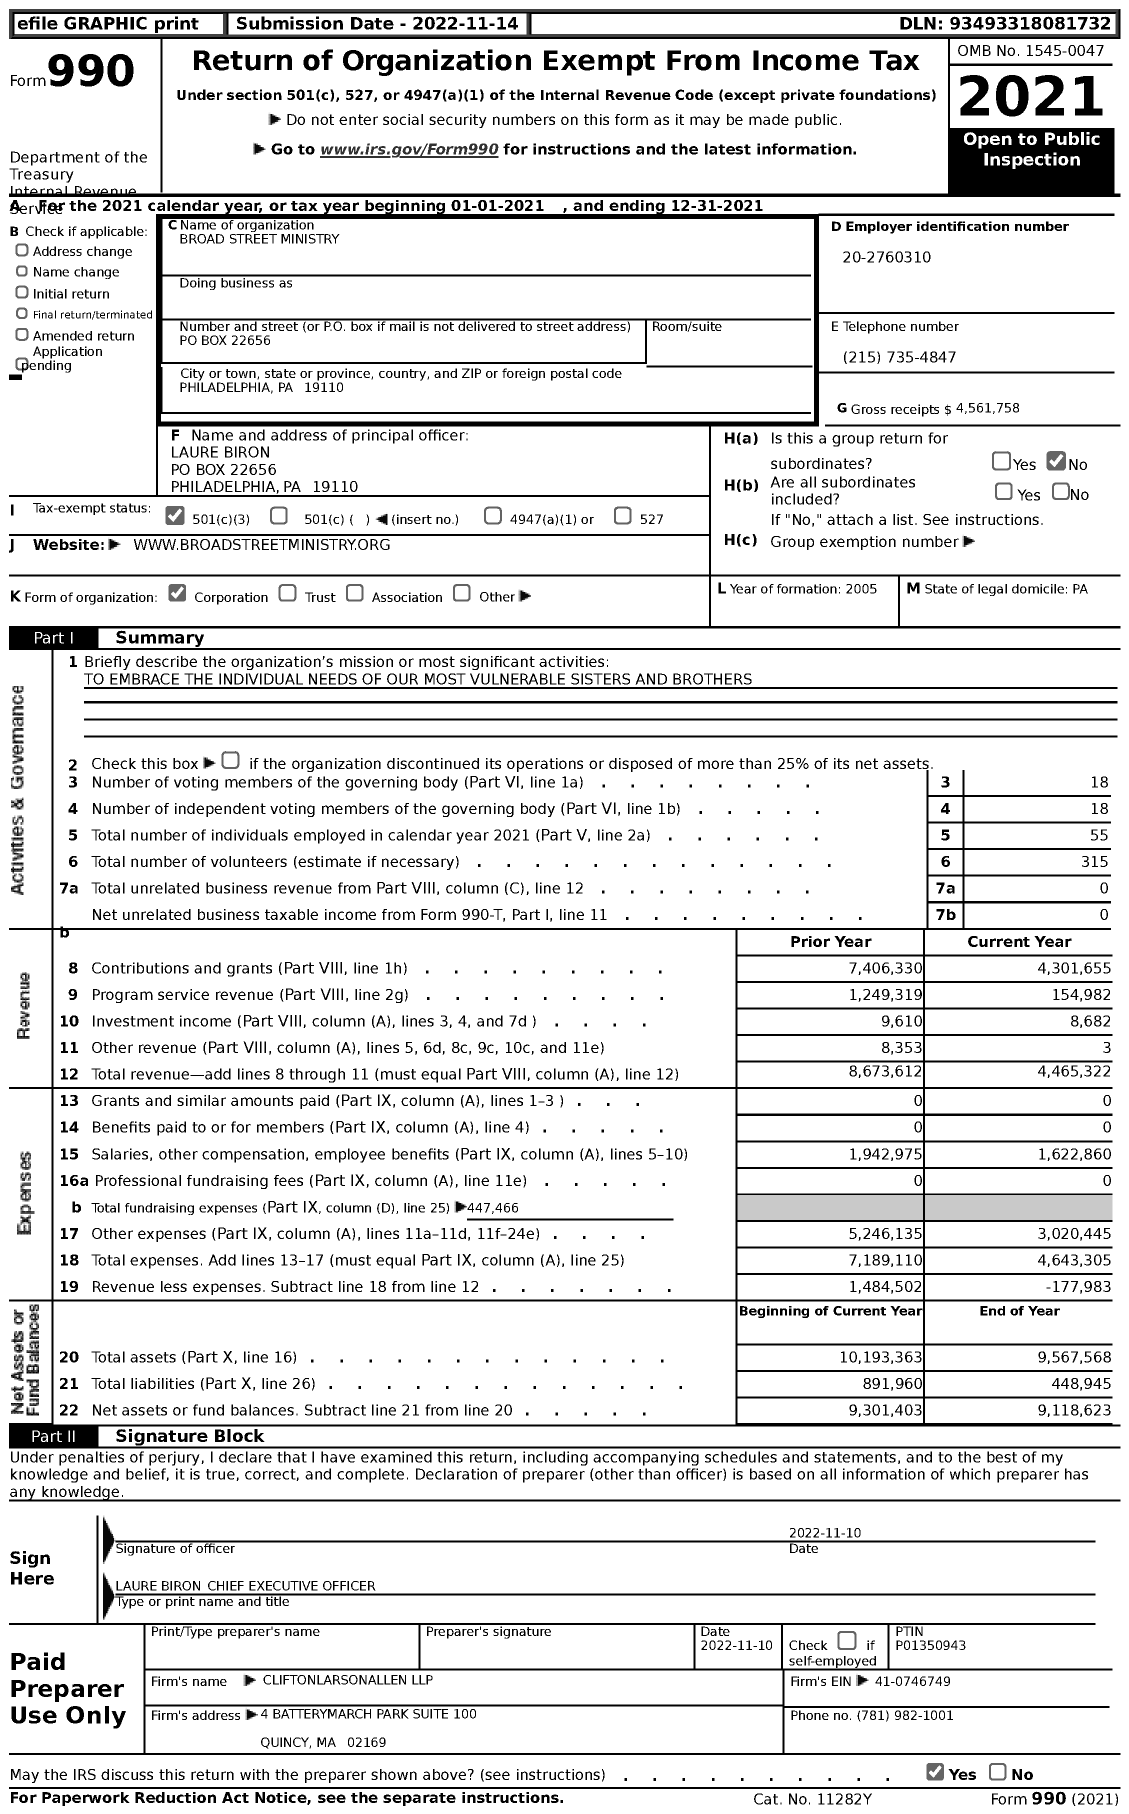 Image of first page of 2021 Form 990 for Broad Street Ministry (BSM)